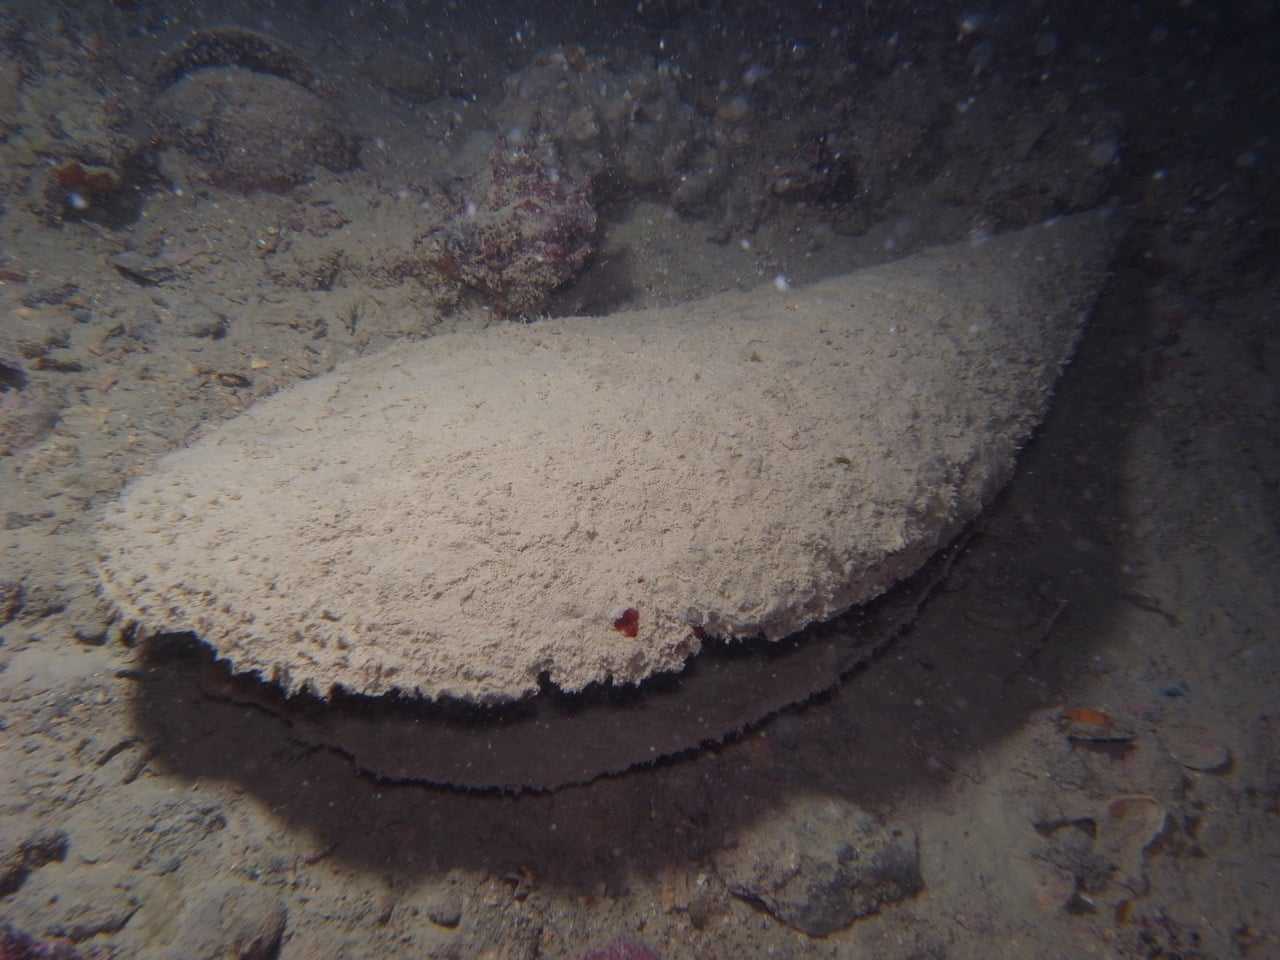 Pinna nobilis shell empty and uprooted after the death of the individual (photo: Shoreline soc. Coop. - CNR-ISMAR)